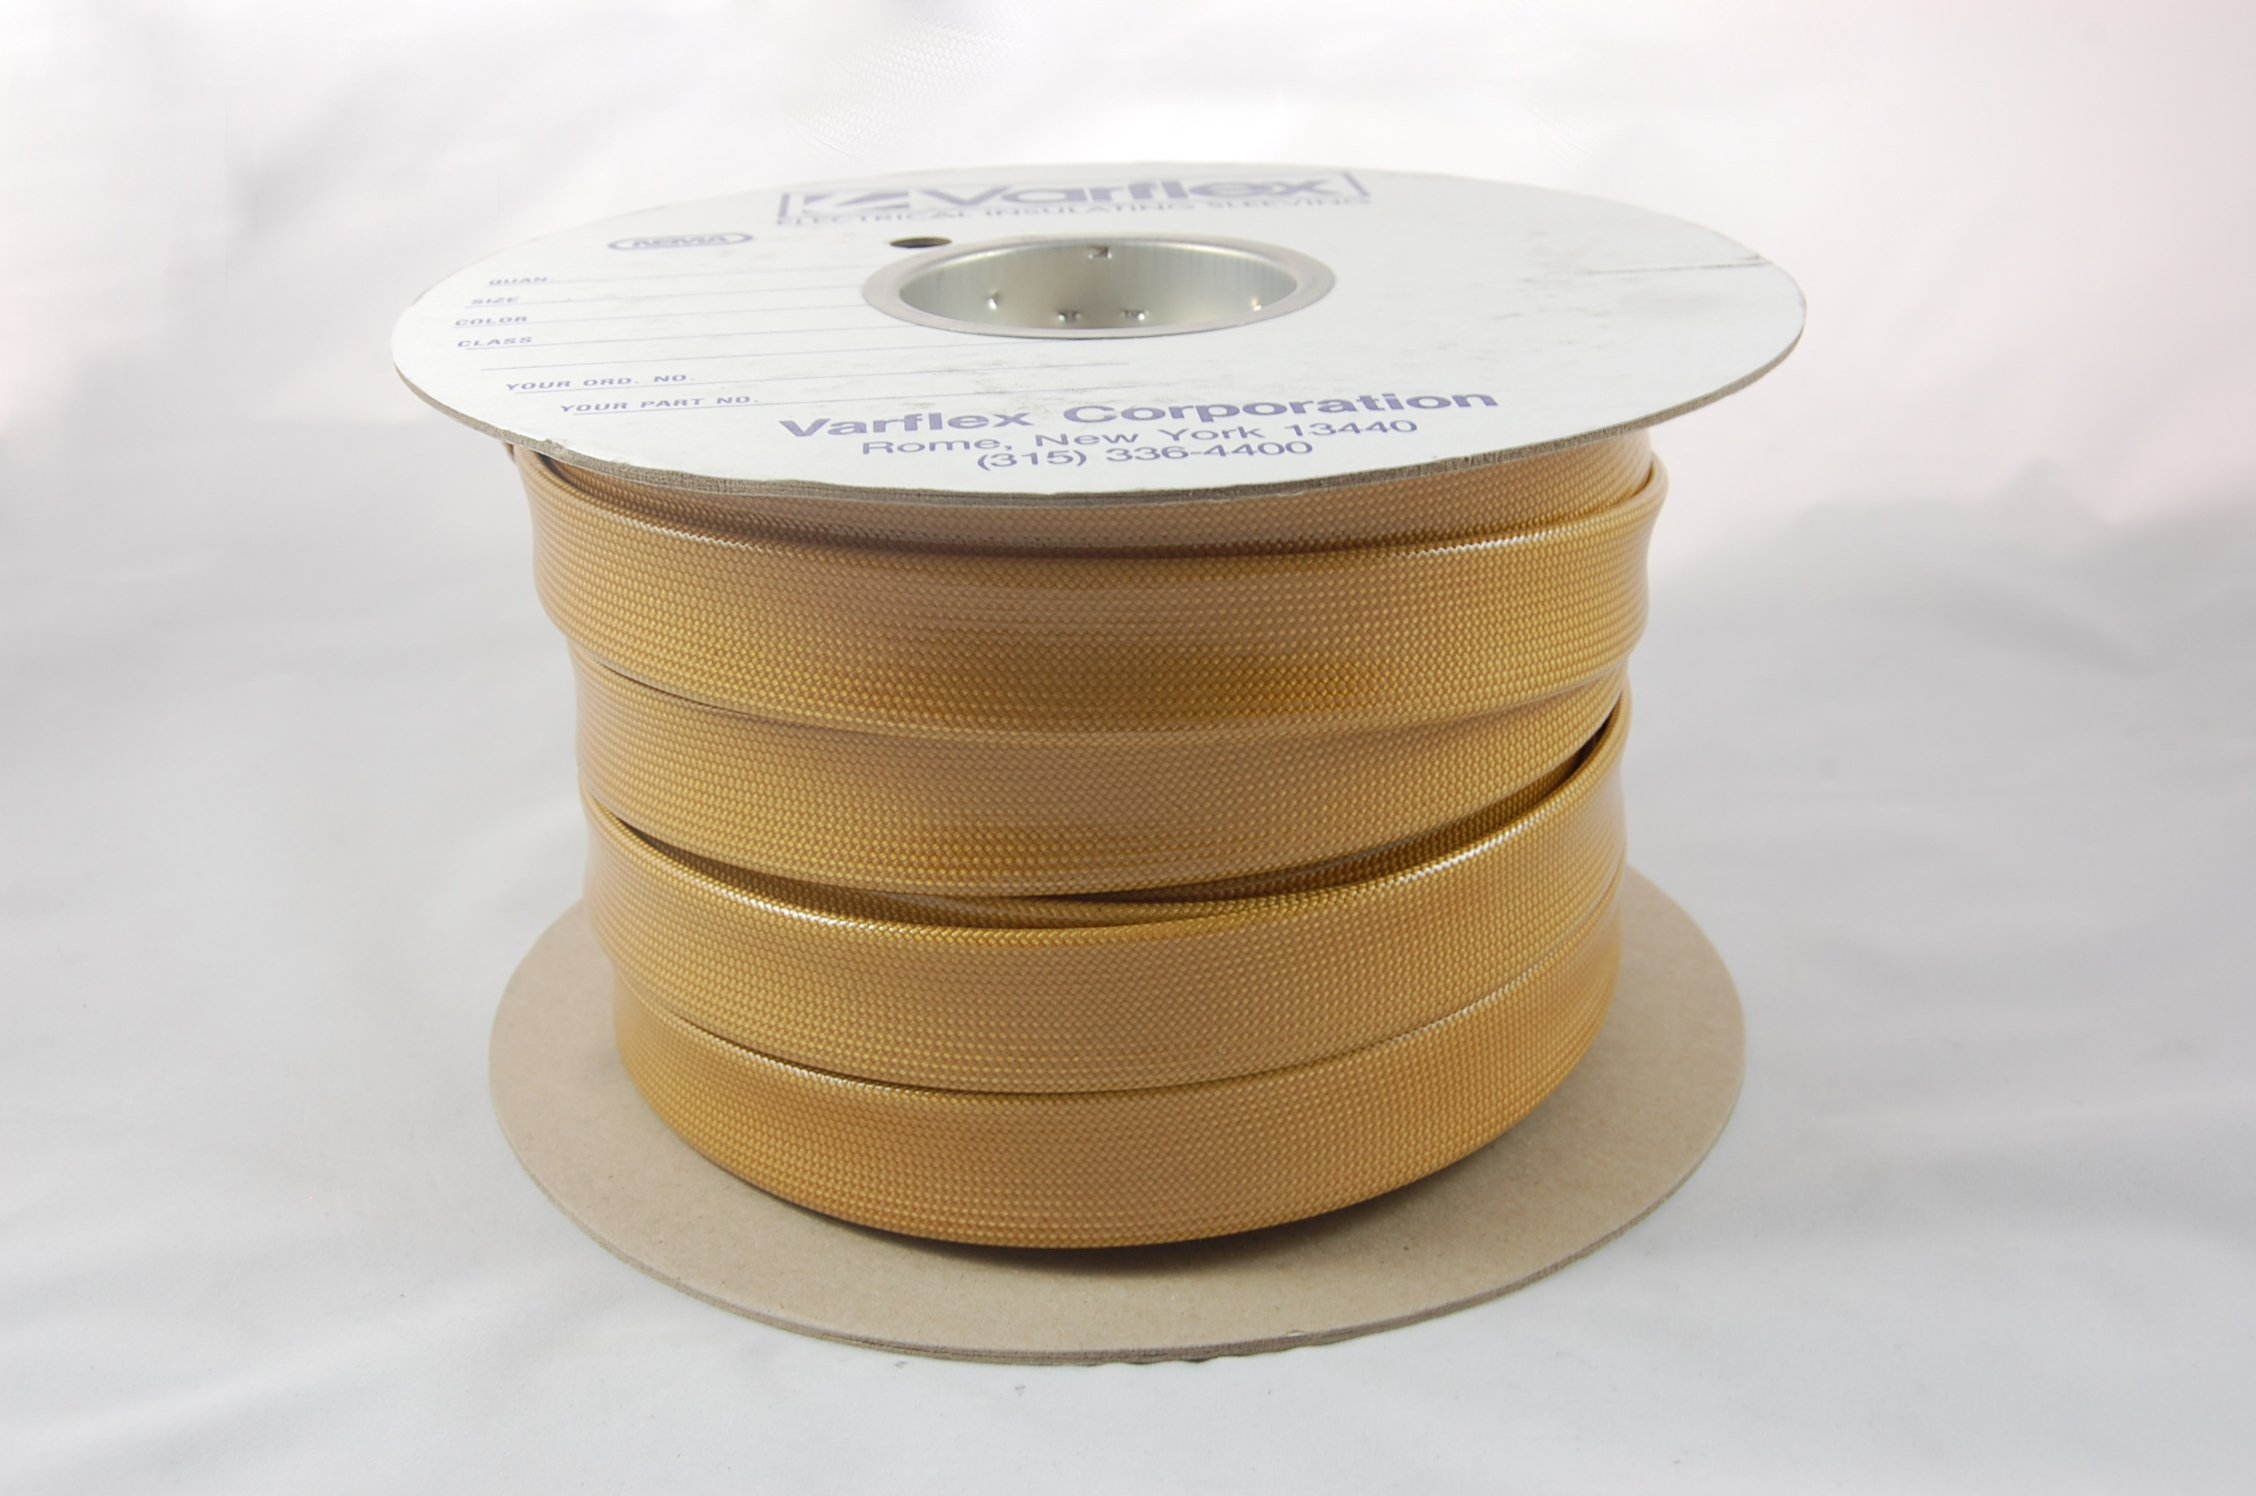 3/4" AWG Varglas Silicone Resin 500 Grade H-C-1 (2500V) High Temperature Silicone Resin Coated Braided Fiberglass Sleeving 200°C, natural, 100 FT per spool